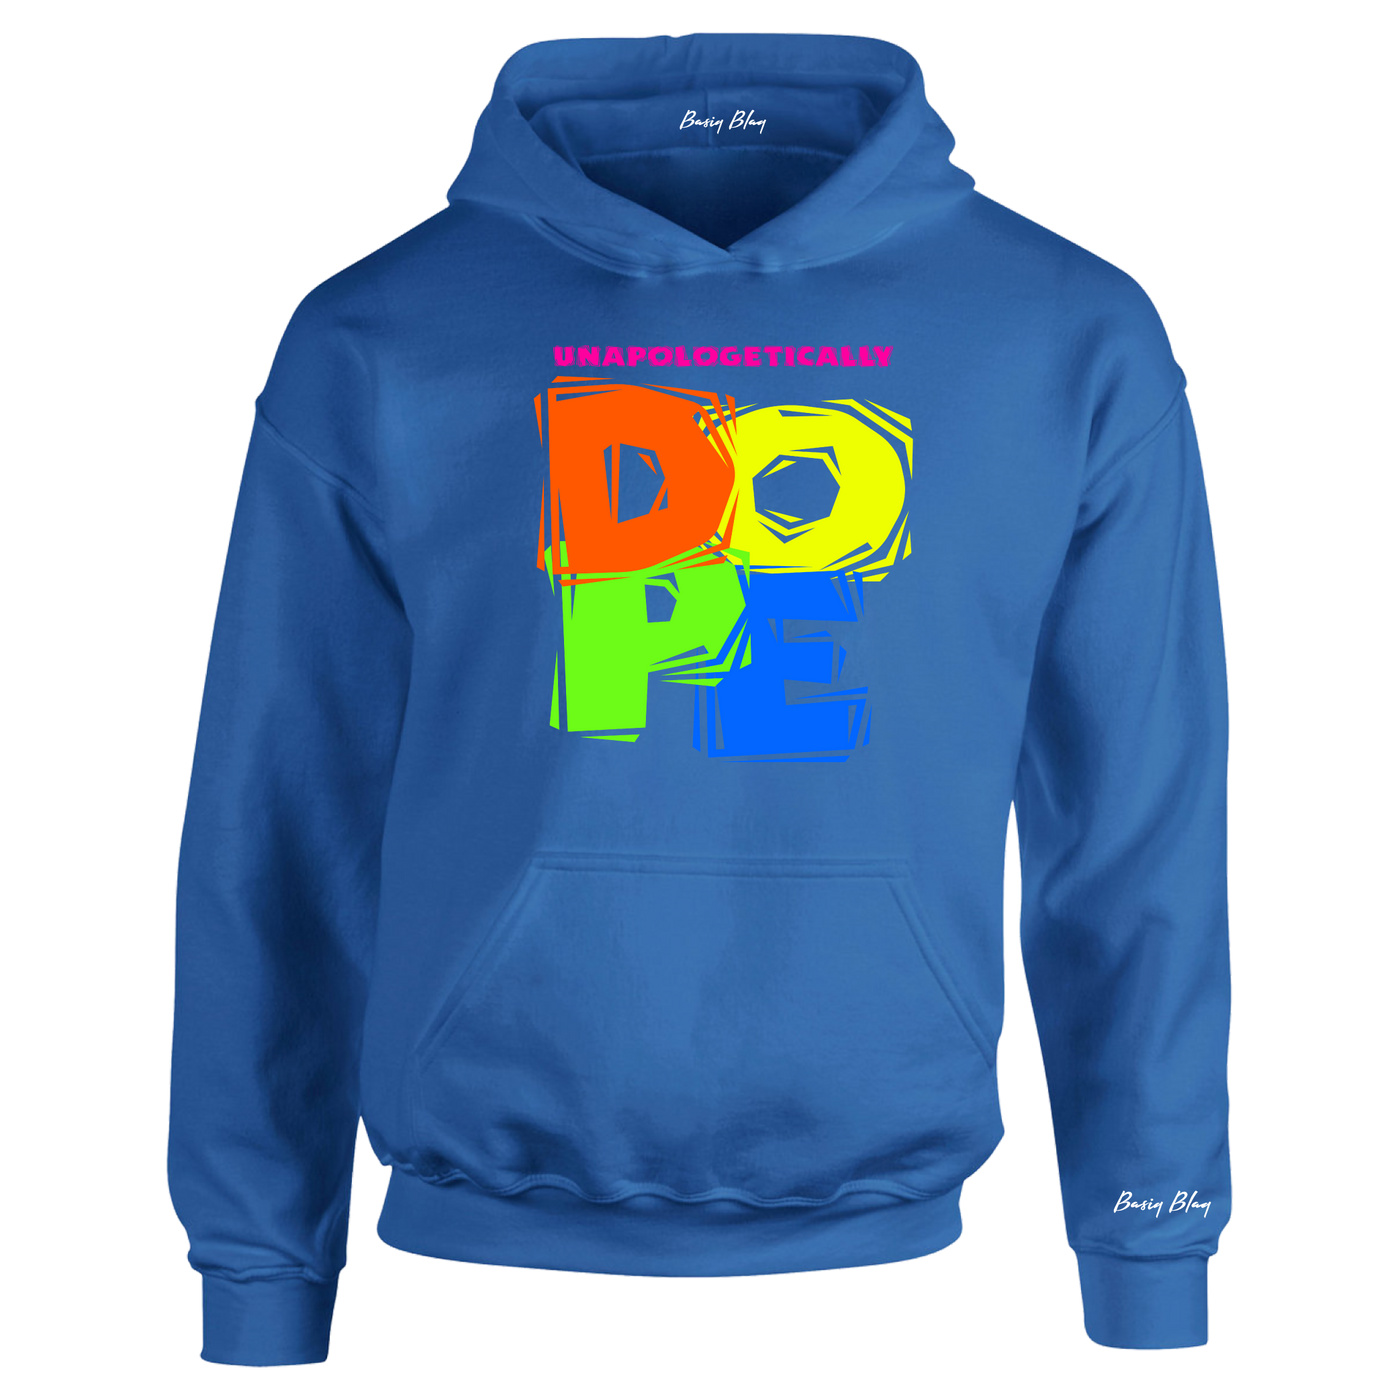 UNAPOLOGETICALLY DOPE NEON COLORS UNISEX HOODIE